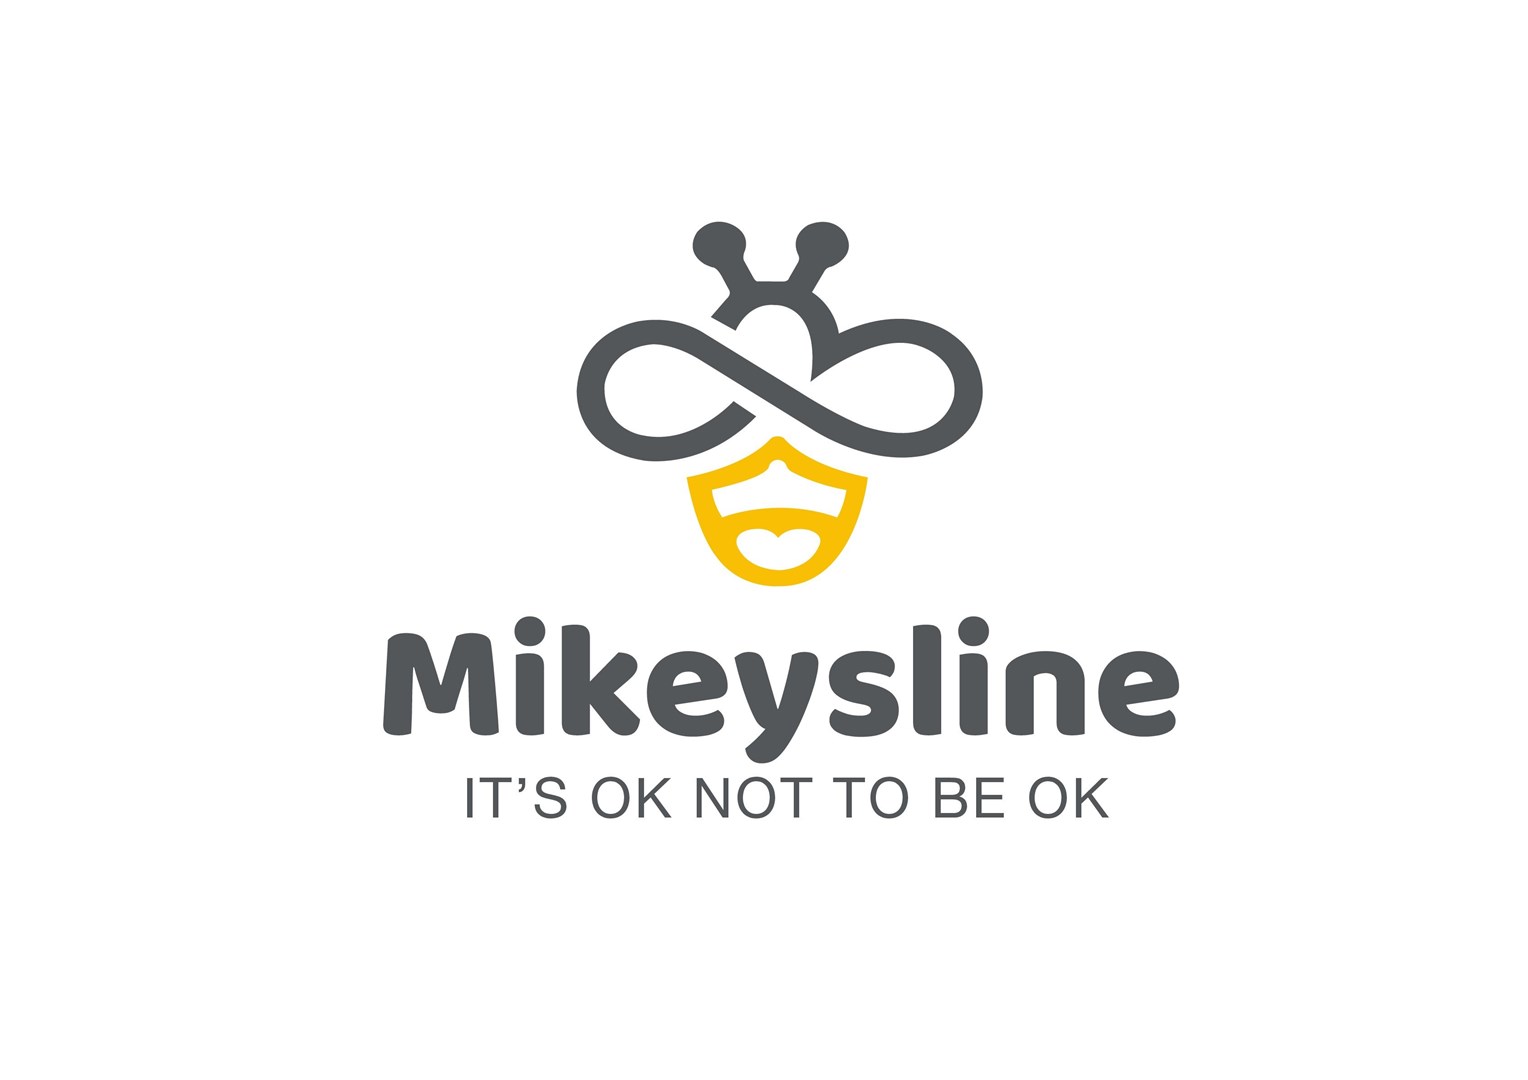 Mikeysline let's people know it is ok not to be ok.